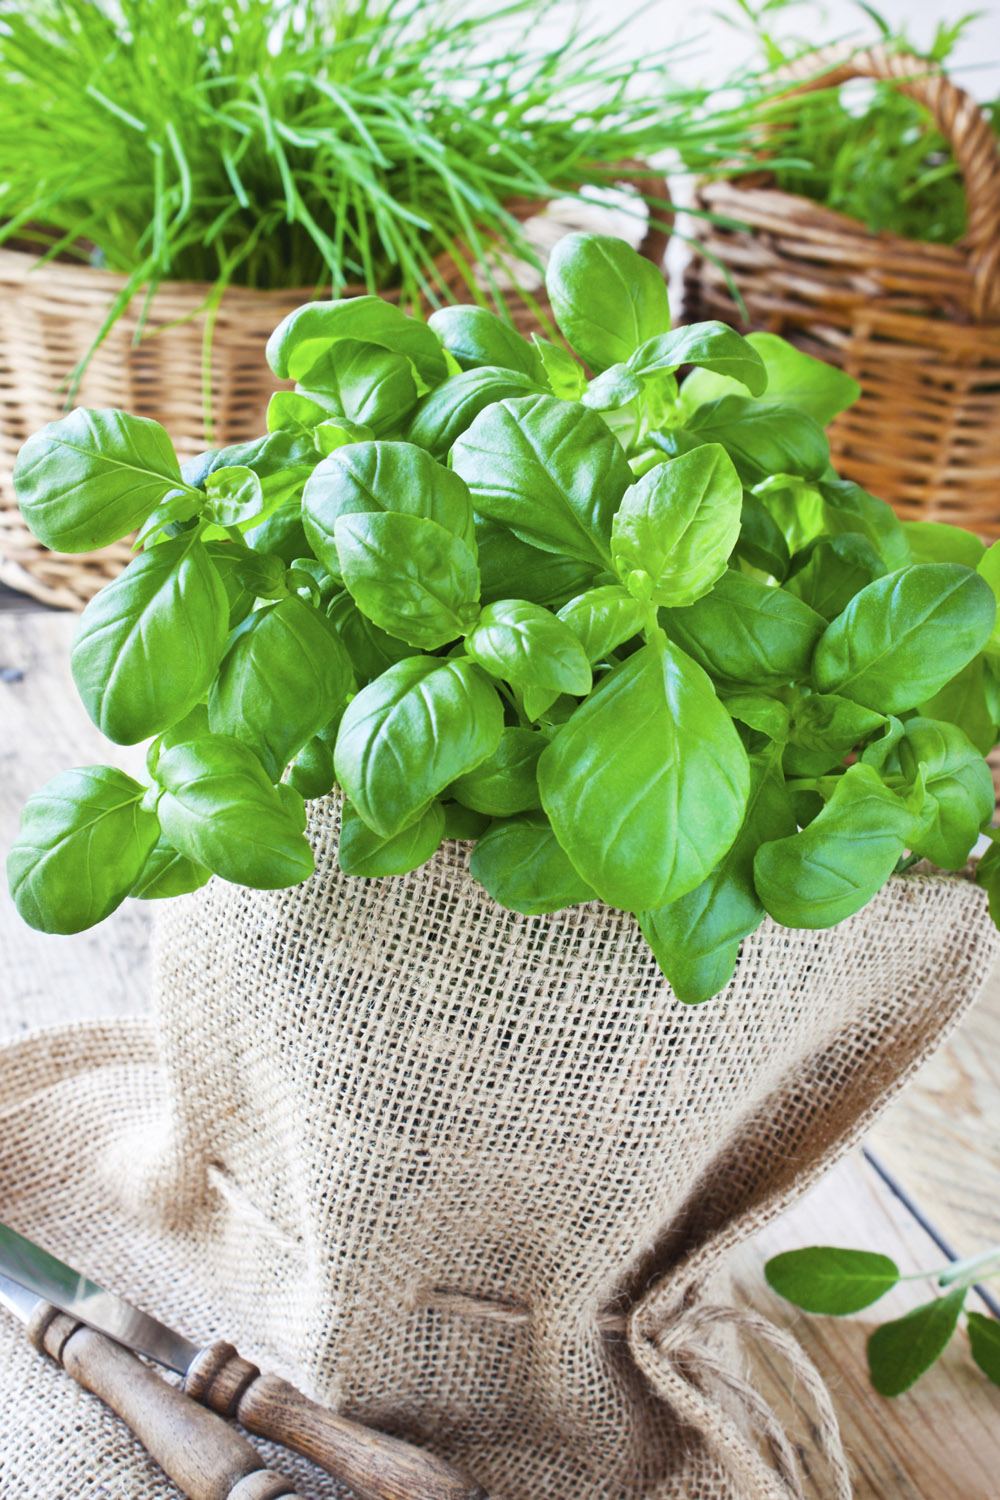 Garden Plot: Beware of basil blight and how to curb mosquitoes with BTI